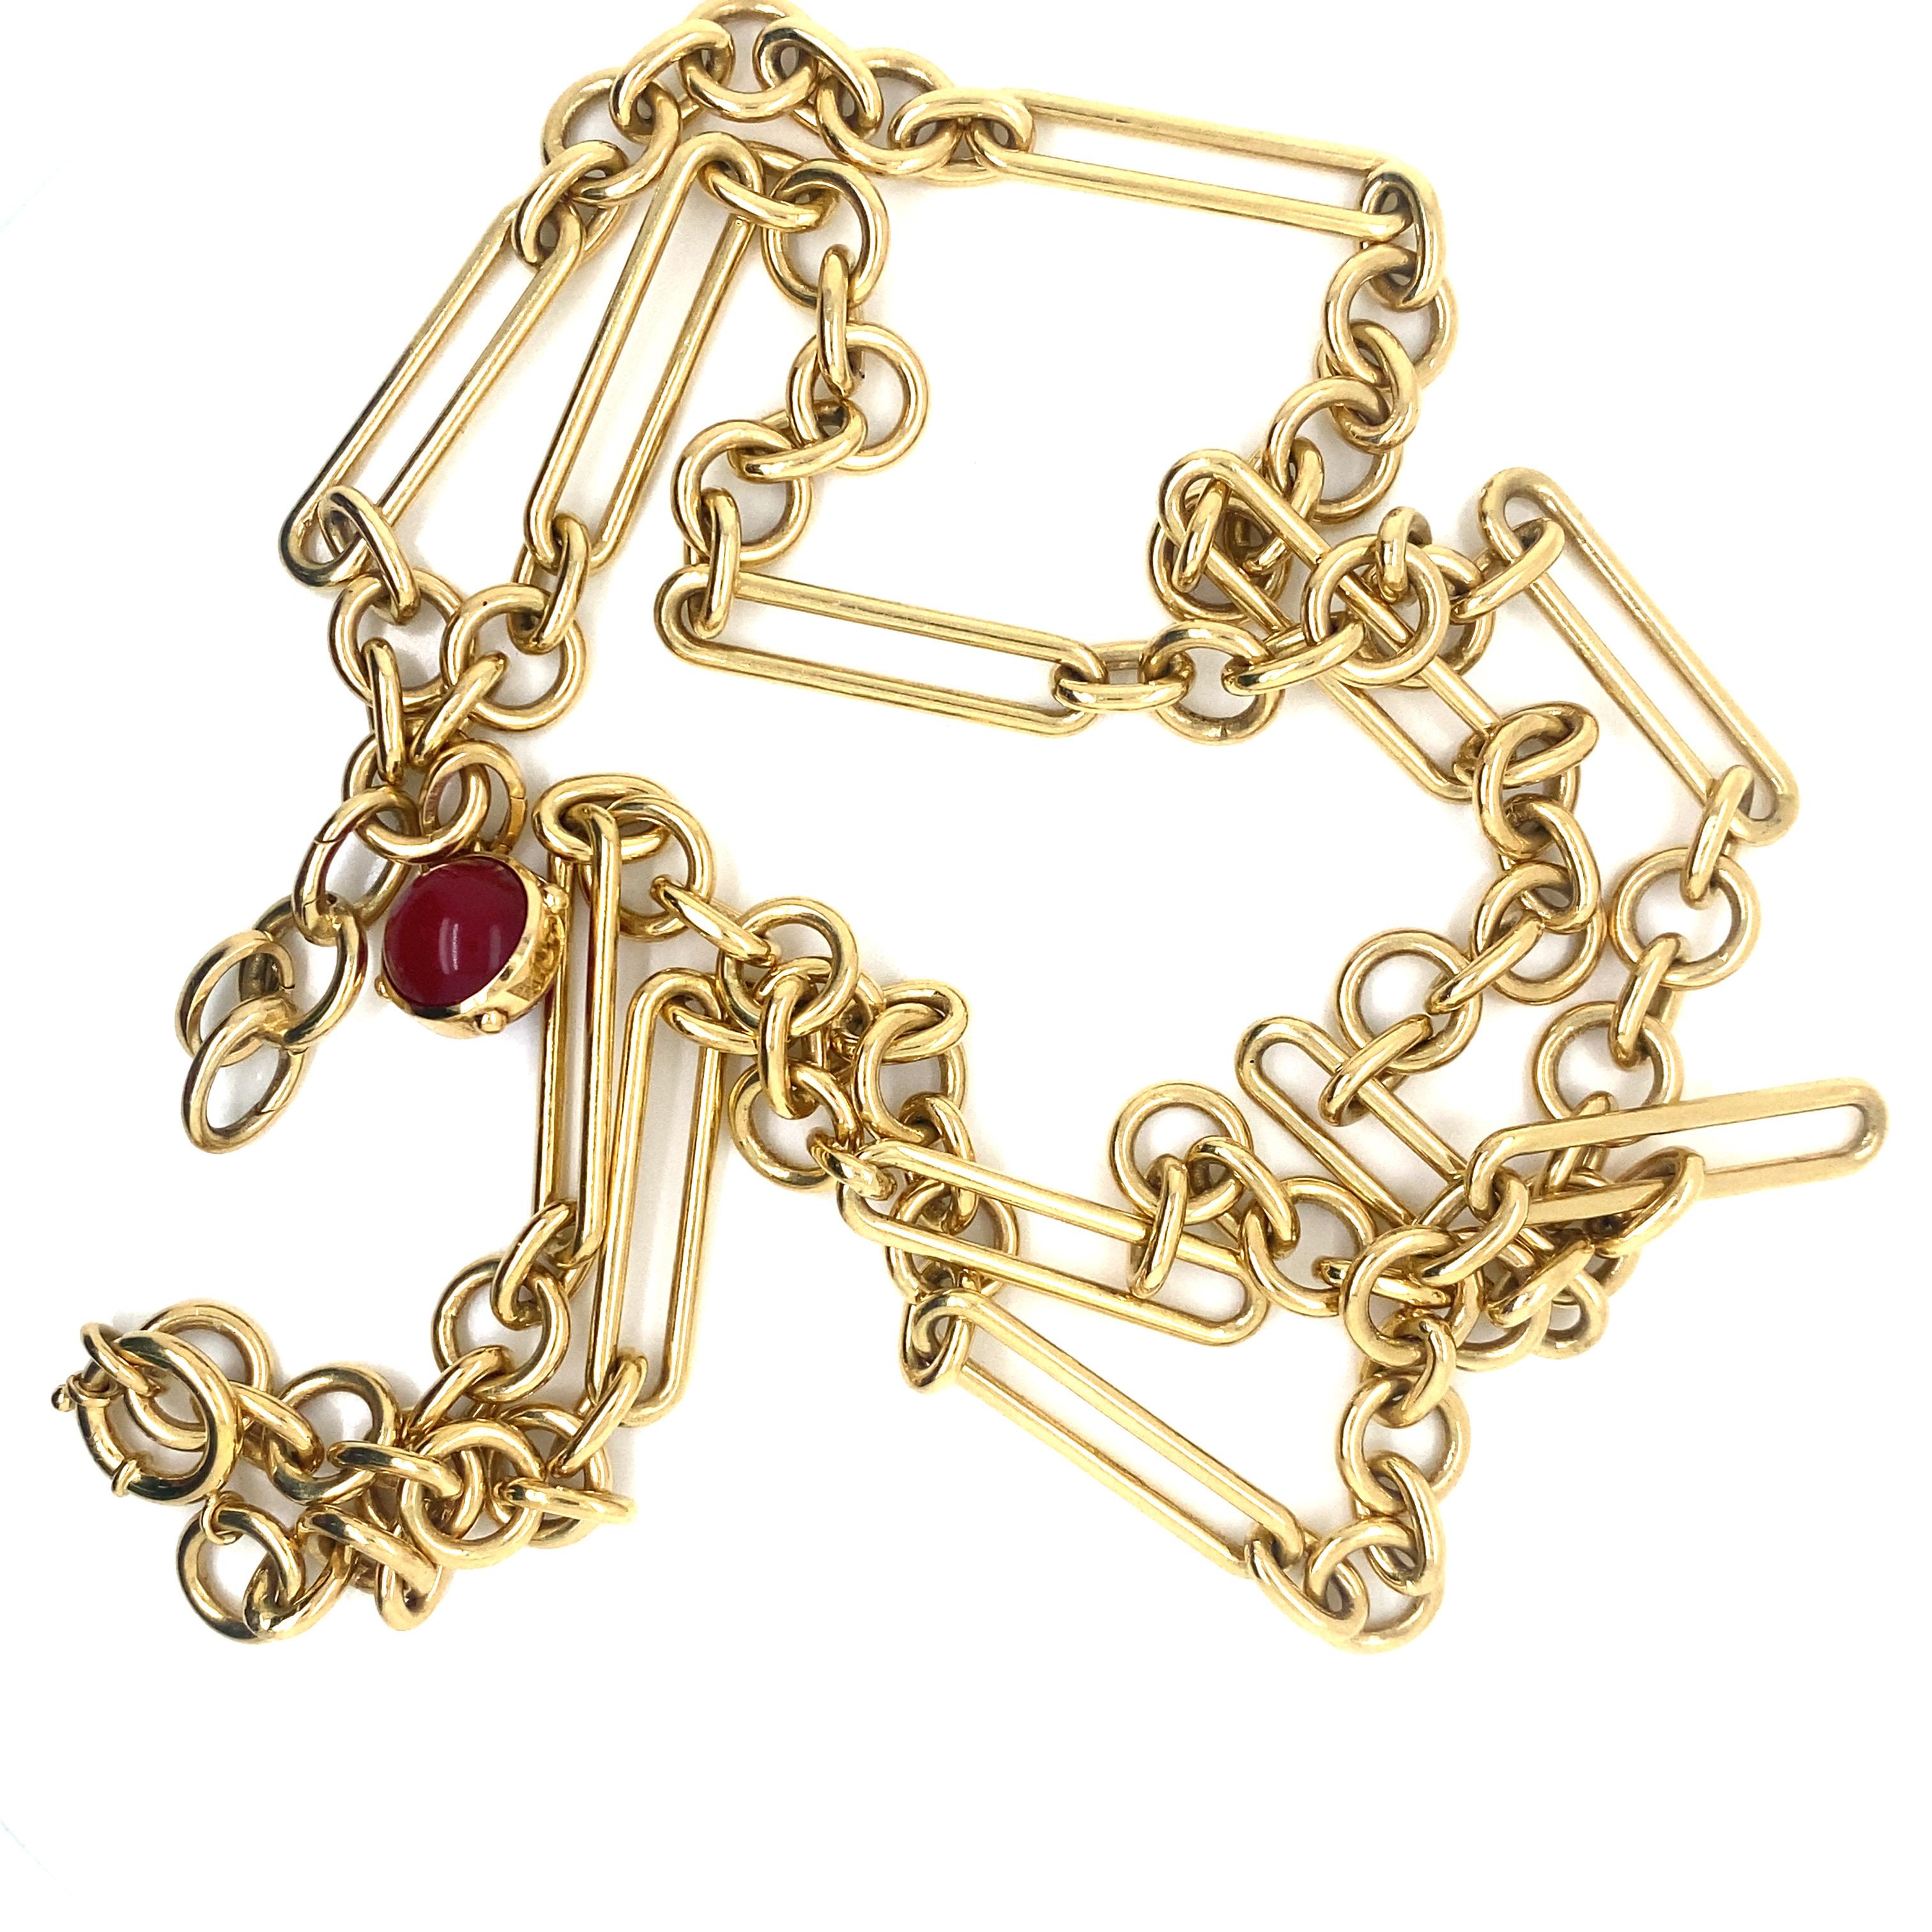 Foundrae Chain Link Necklace in 18K Yellow Gold.  The Necklace measures 36 inch in length. 126.28 grams. Signed. Includes Signed Ruby Charm.  Necklace Only.  Retails $21,585